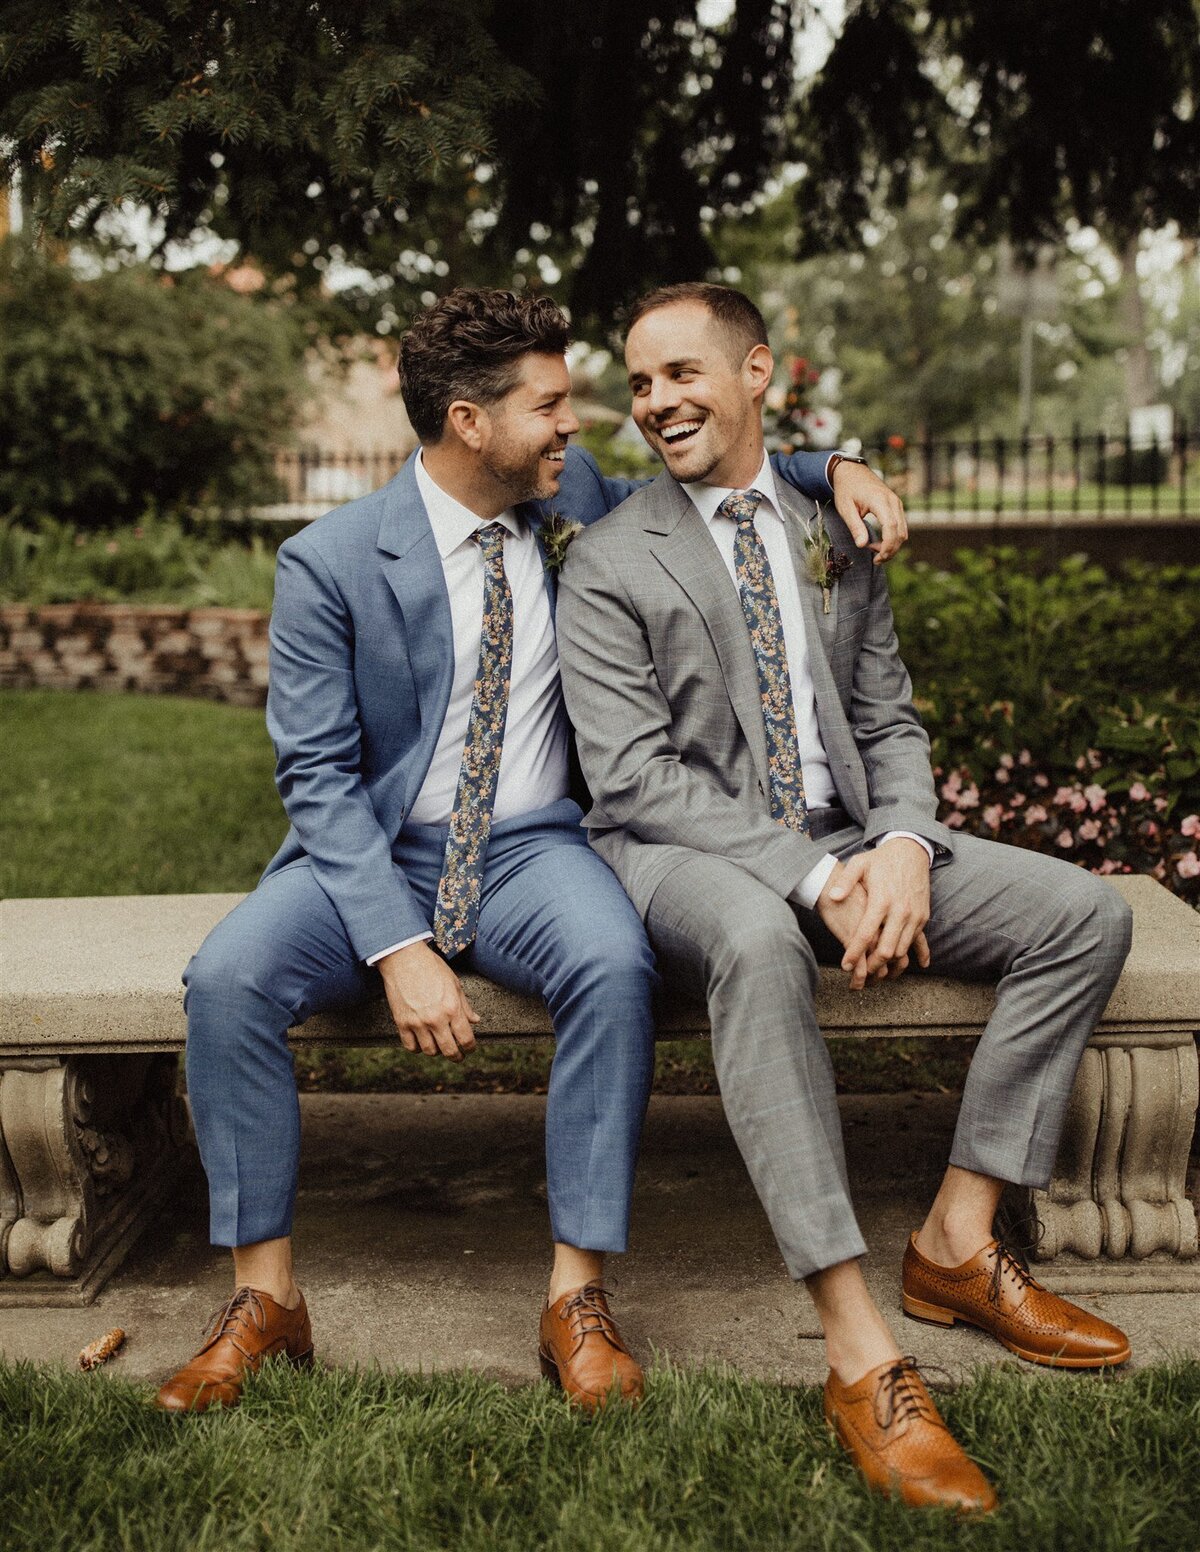 Two grooms portraits at outside wedding venue in Colorado